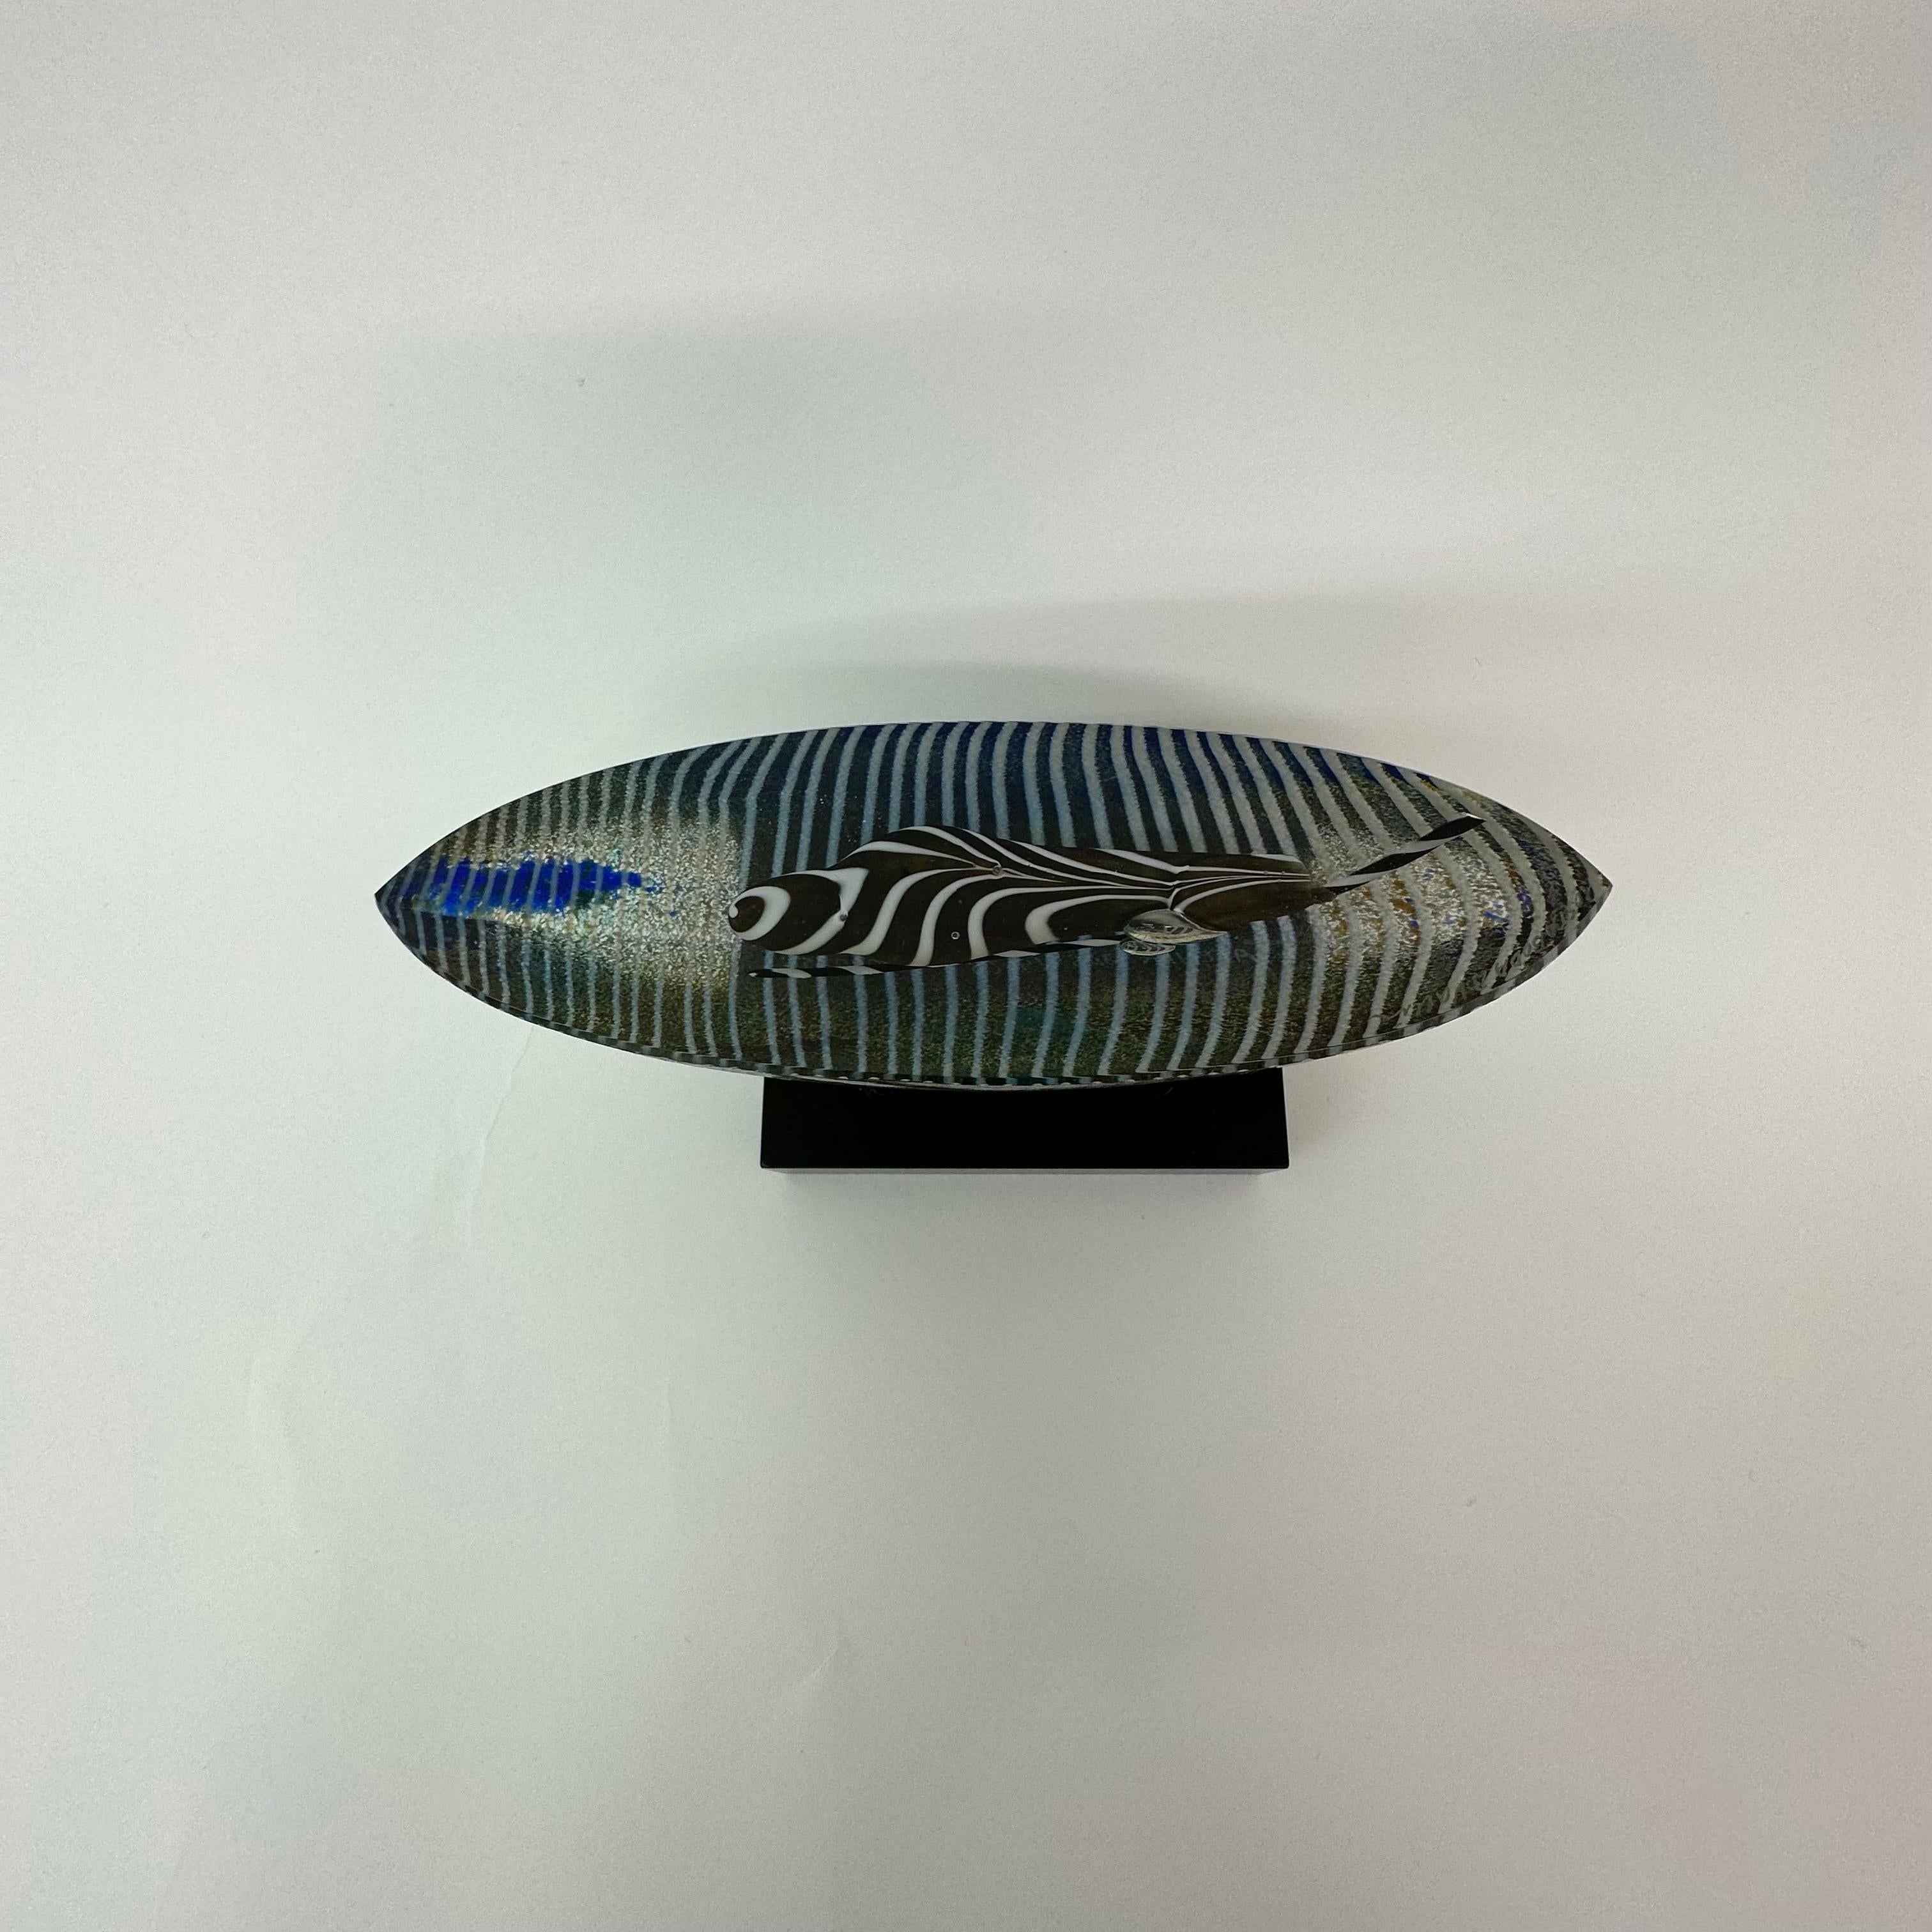 Bertil Vallien for Kosta Boda glass boat sculpture Limited edition Voyage In Excellent Condition For Sale In Delft, NL